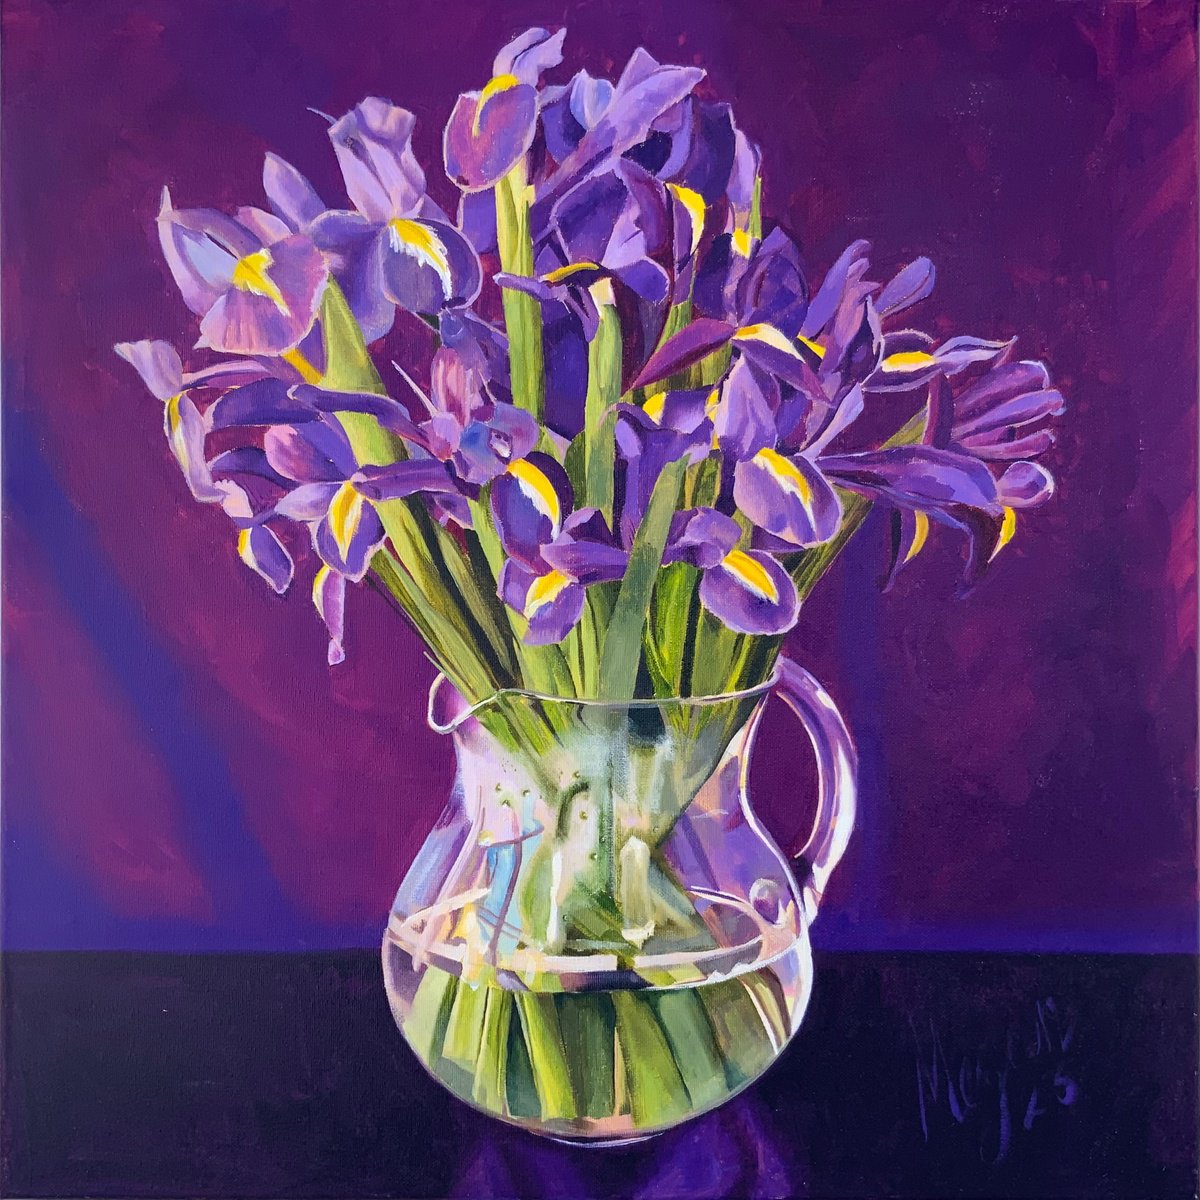 Irises against a purple background by Megan Cheetham